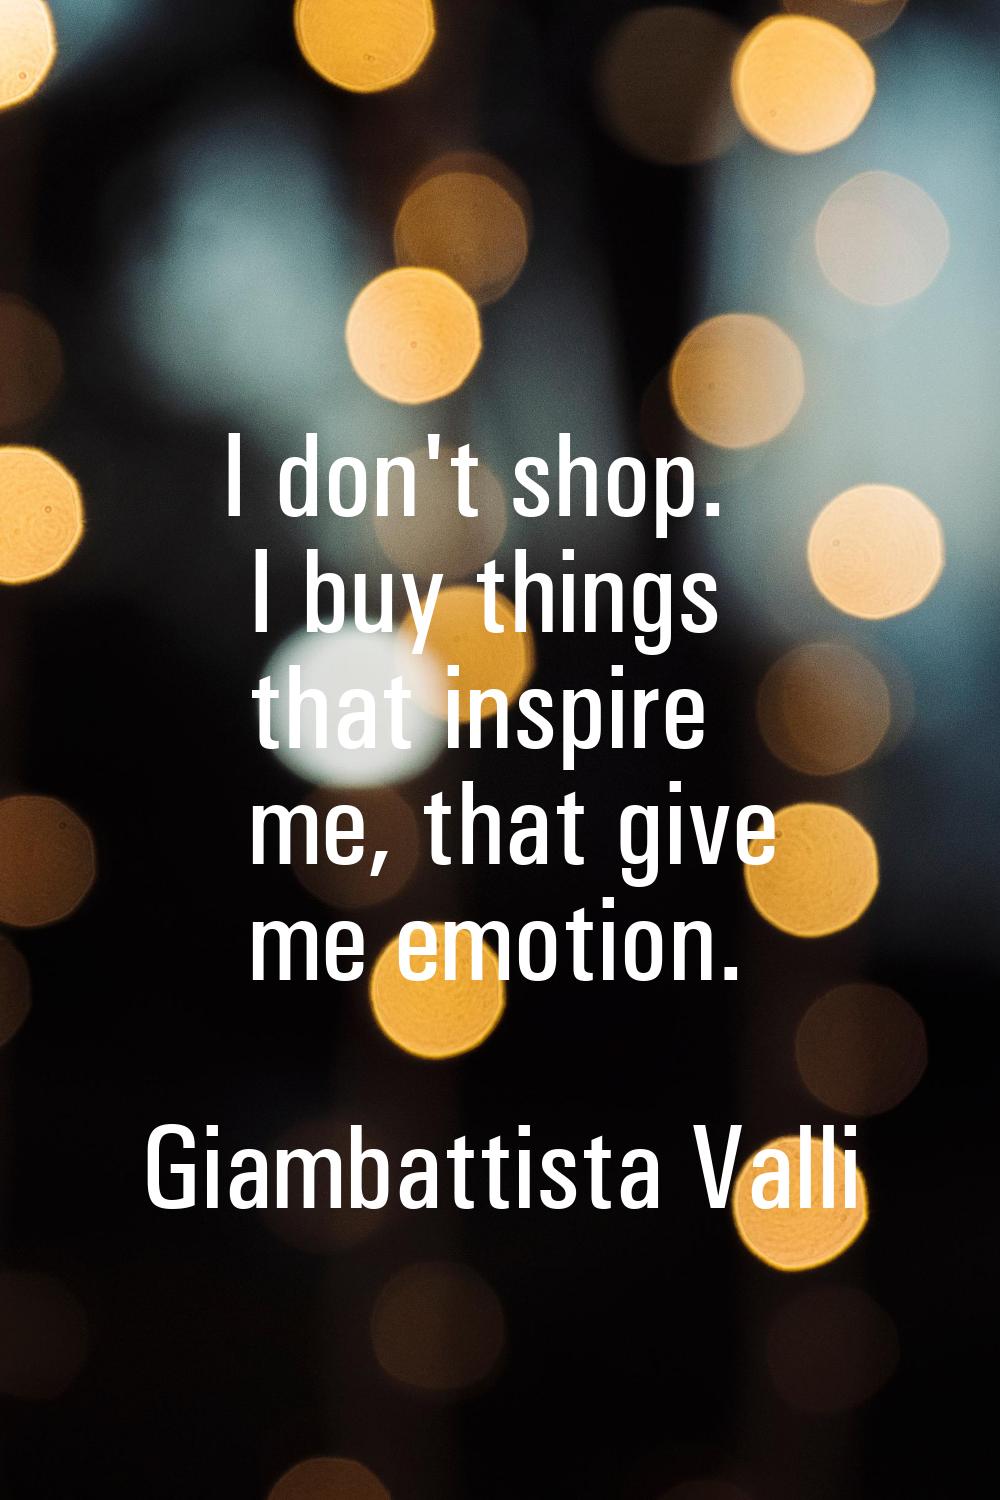 I don't shop. I buy things that inspire me, that give me emotion.